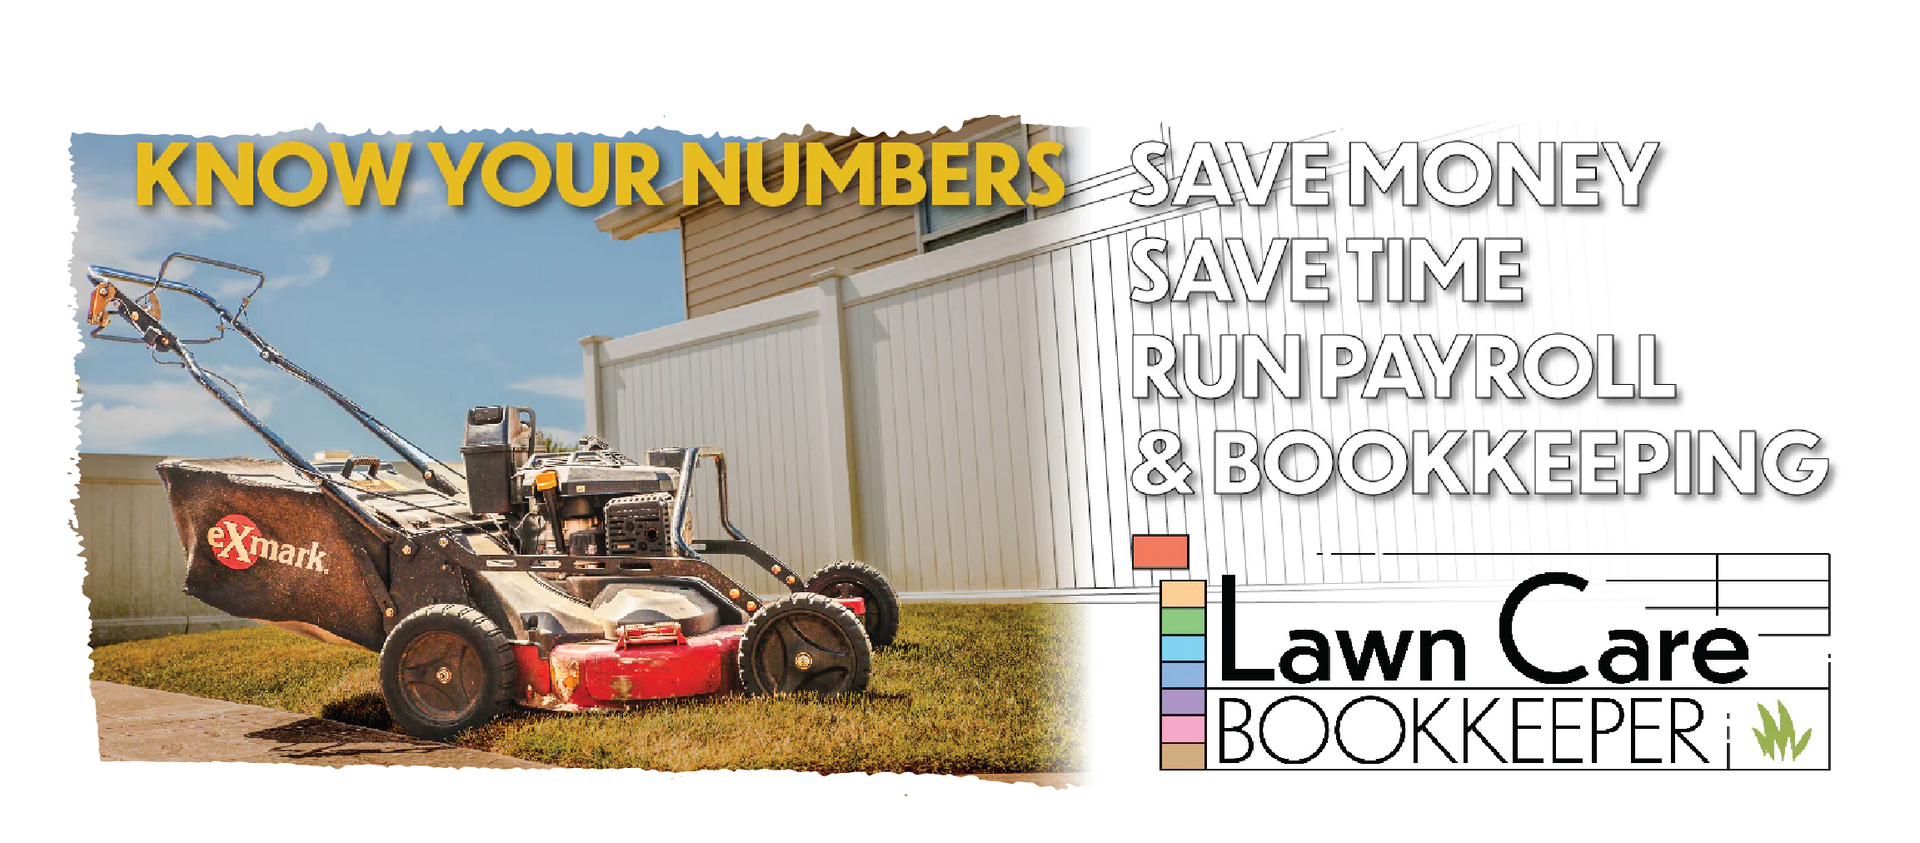 a picture of a lawn mower that says know your numbers save money save time run payroll and bookkeeping